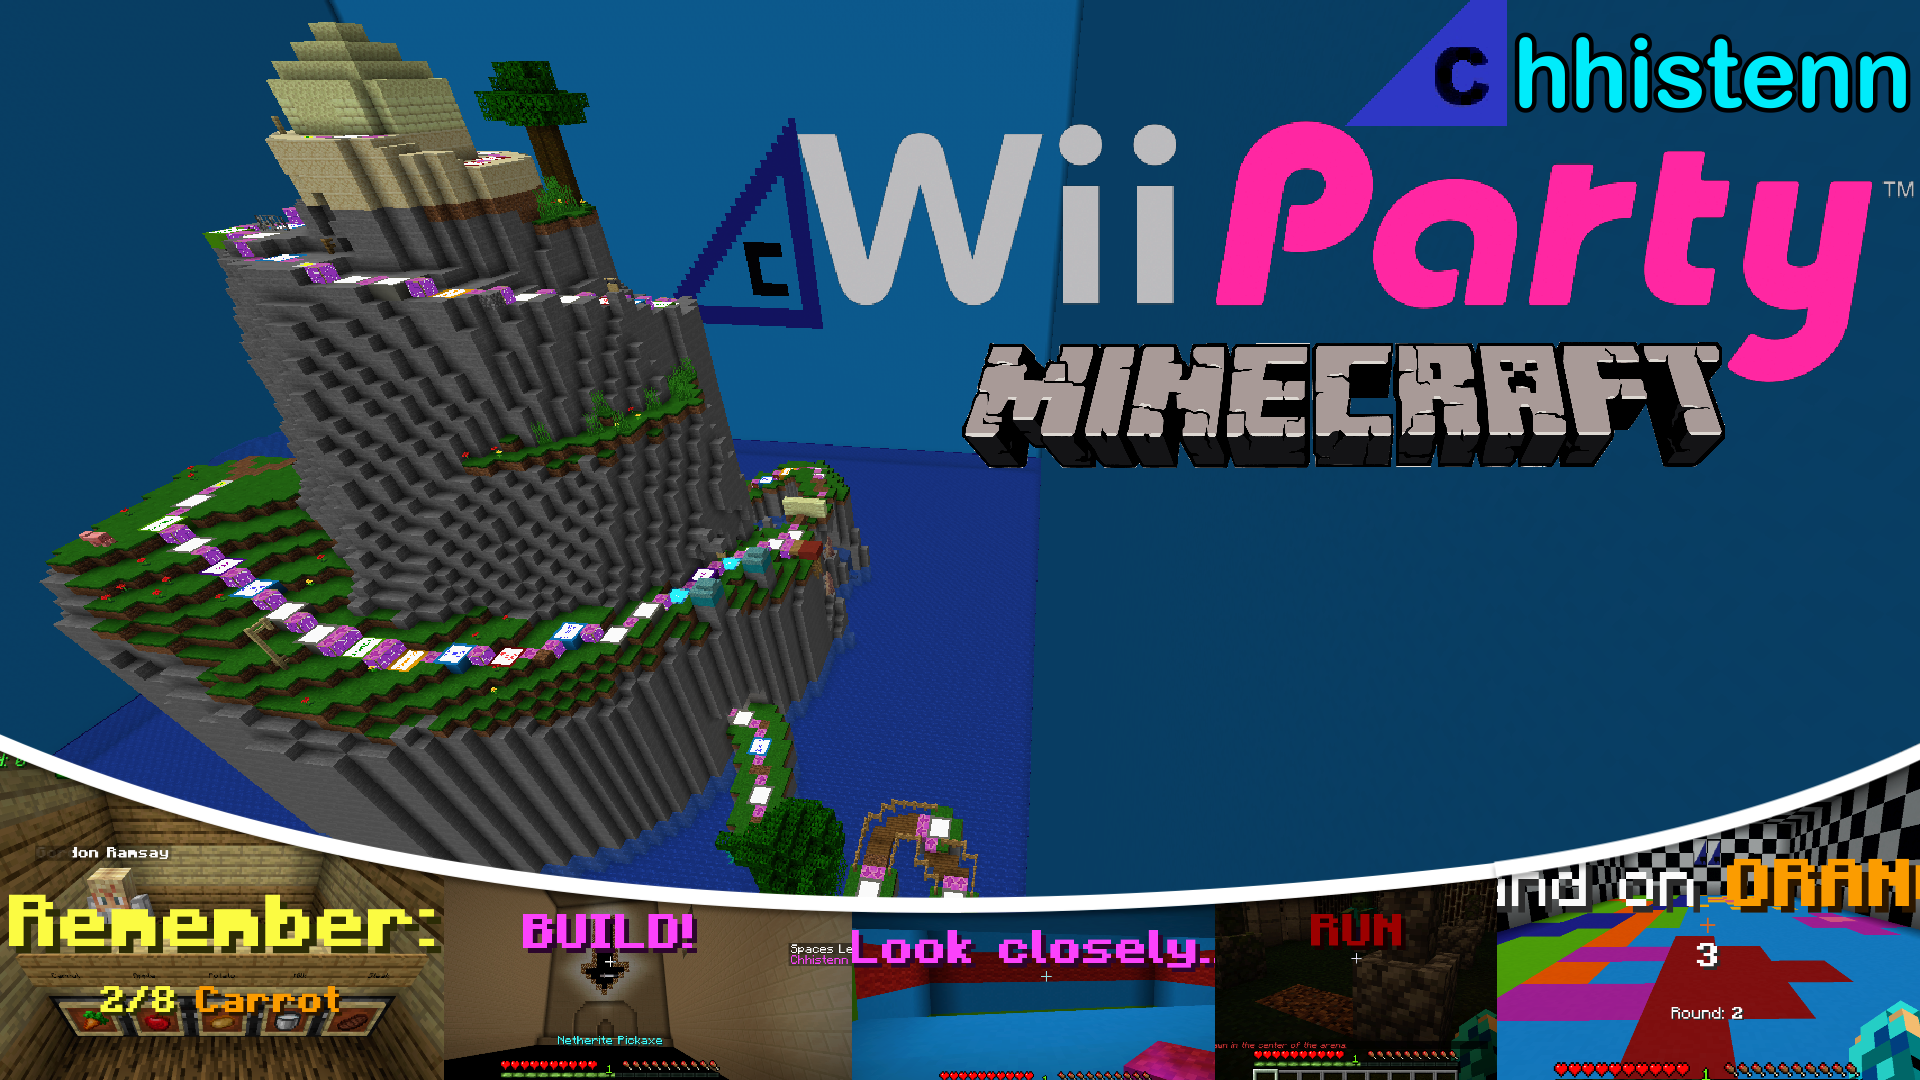 The logo for Wii Party, a Minecraft Map for 1.20.2 by Chhistenn